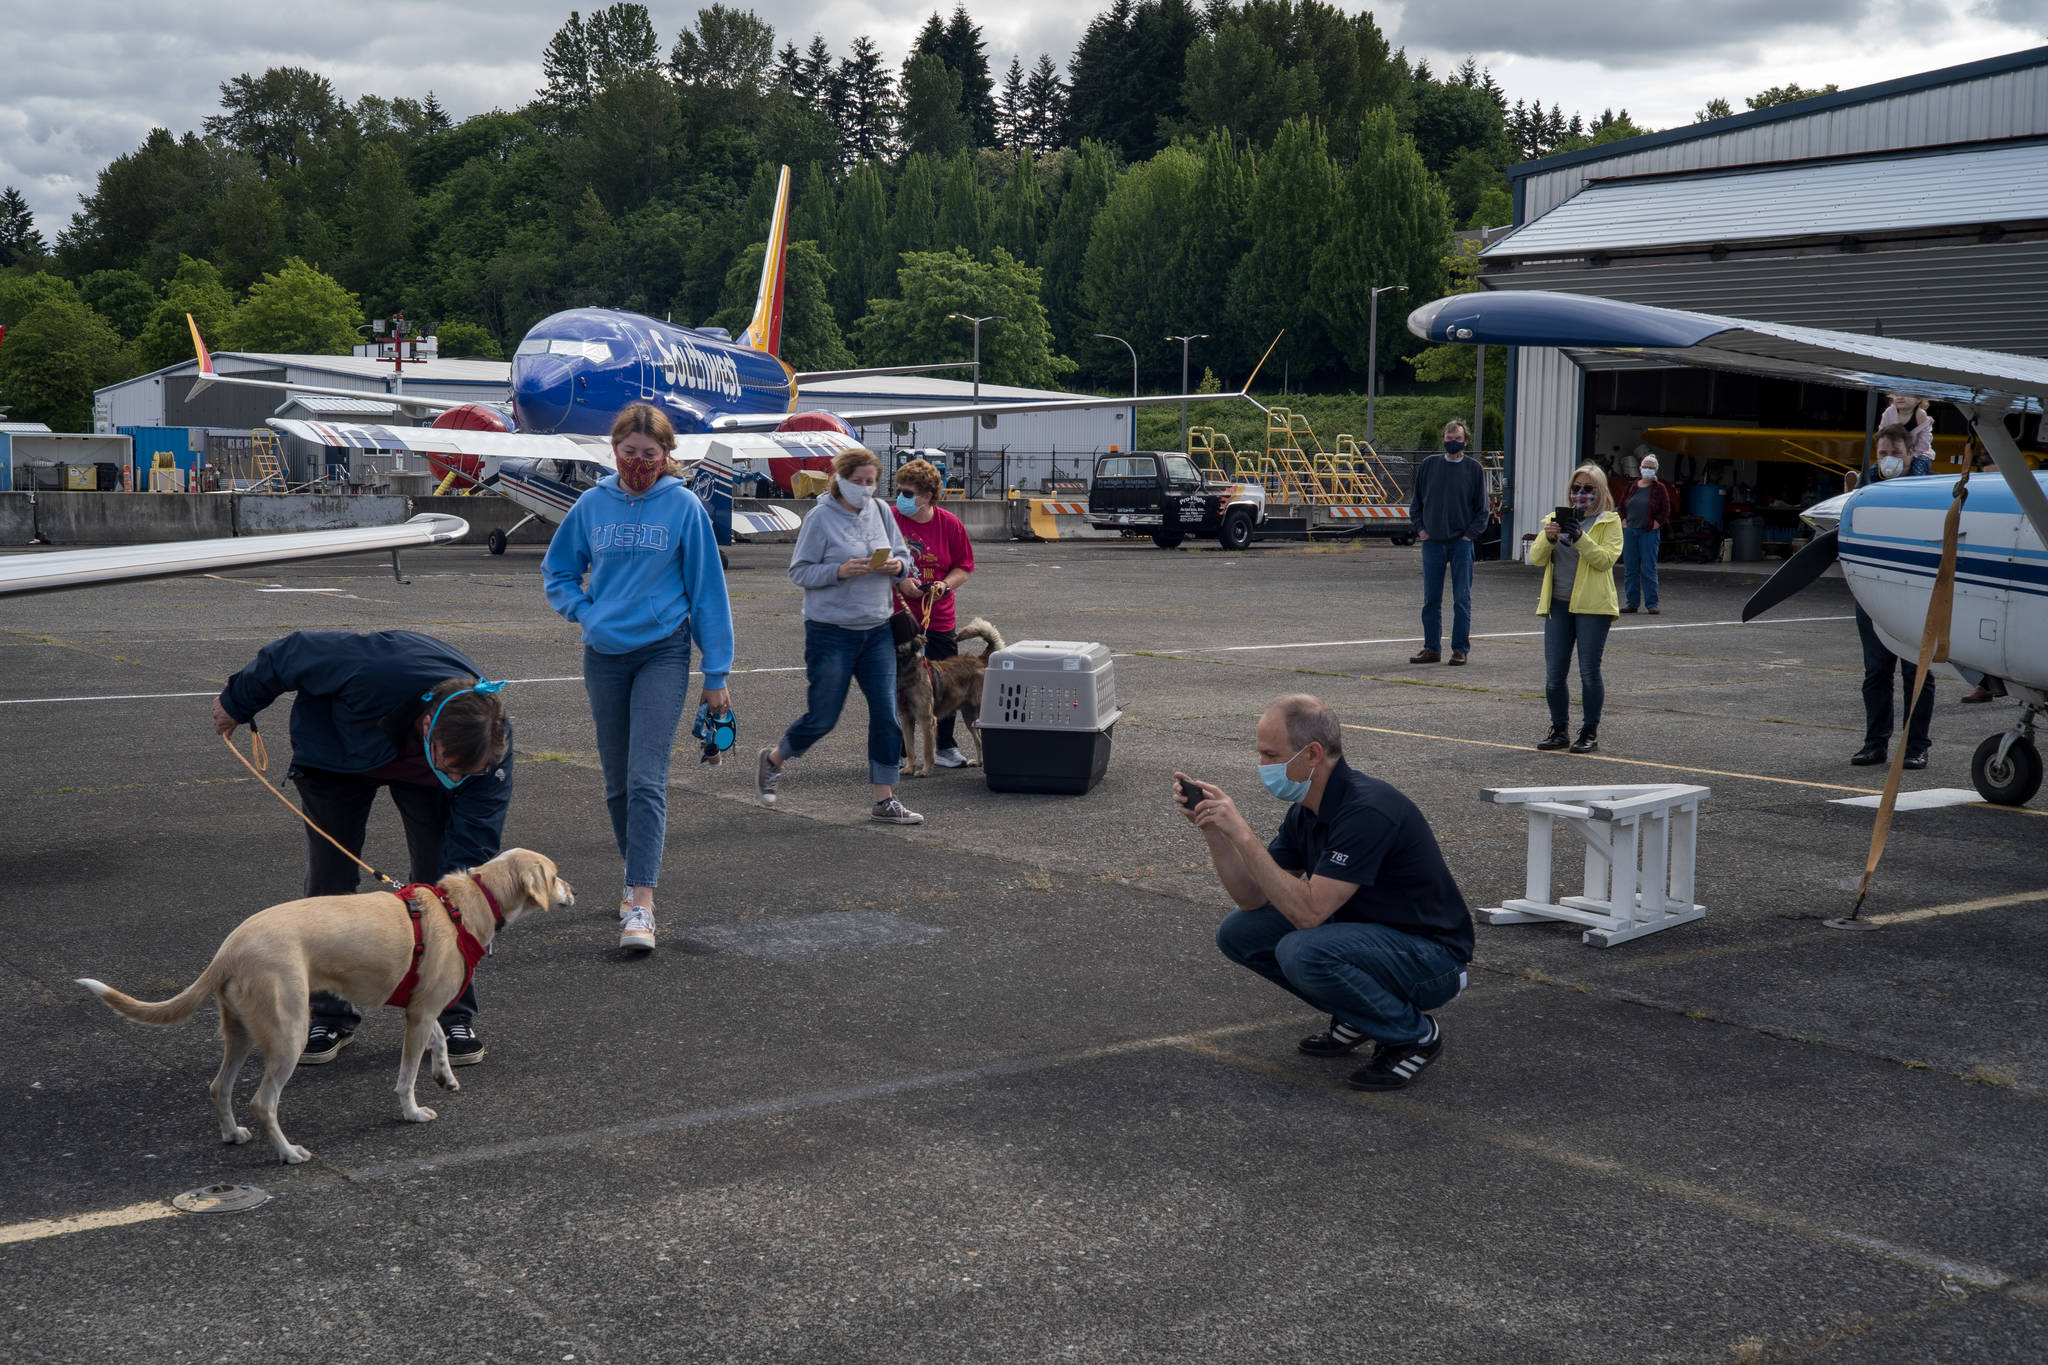 Niaya with her new family meet for the first time at Renton Municipal Airport. The labrador-beagle mix travelled thousands of miles to meet her new family in the midst of the coronavirus pandemic. Photo by Andre Osorio/For the Renton Reporter